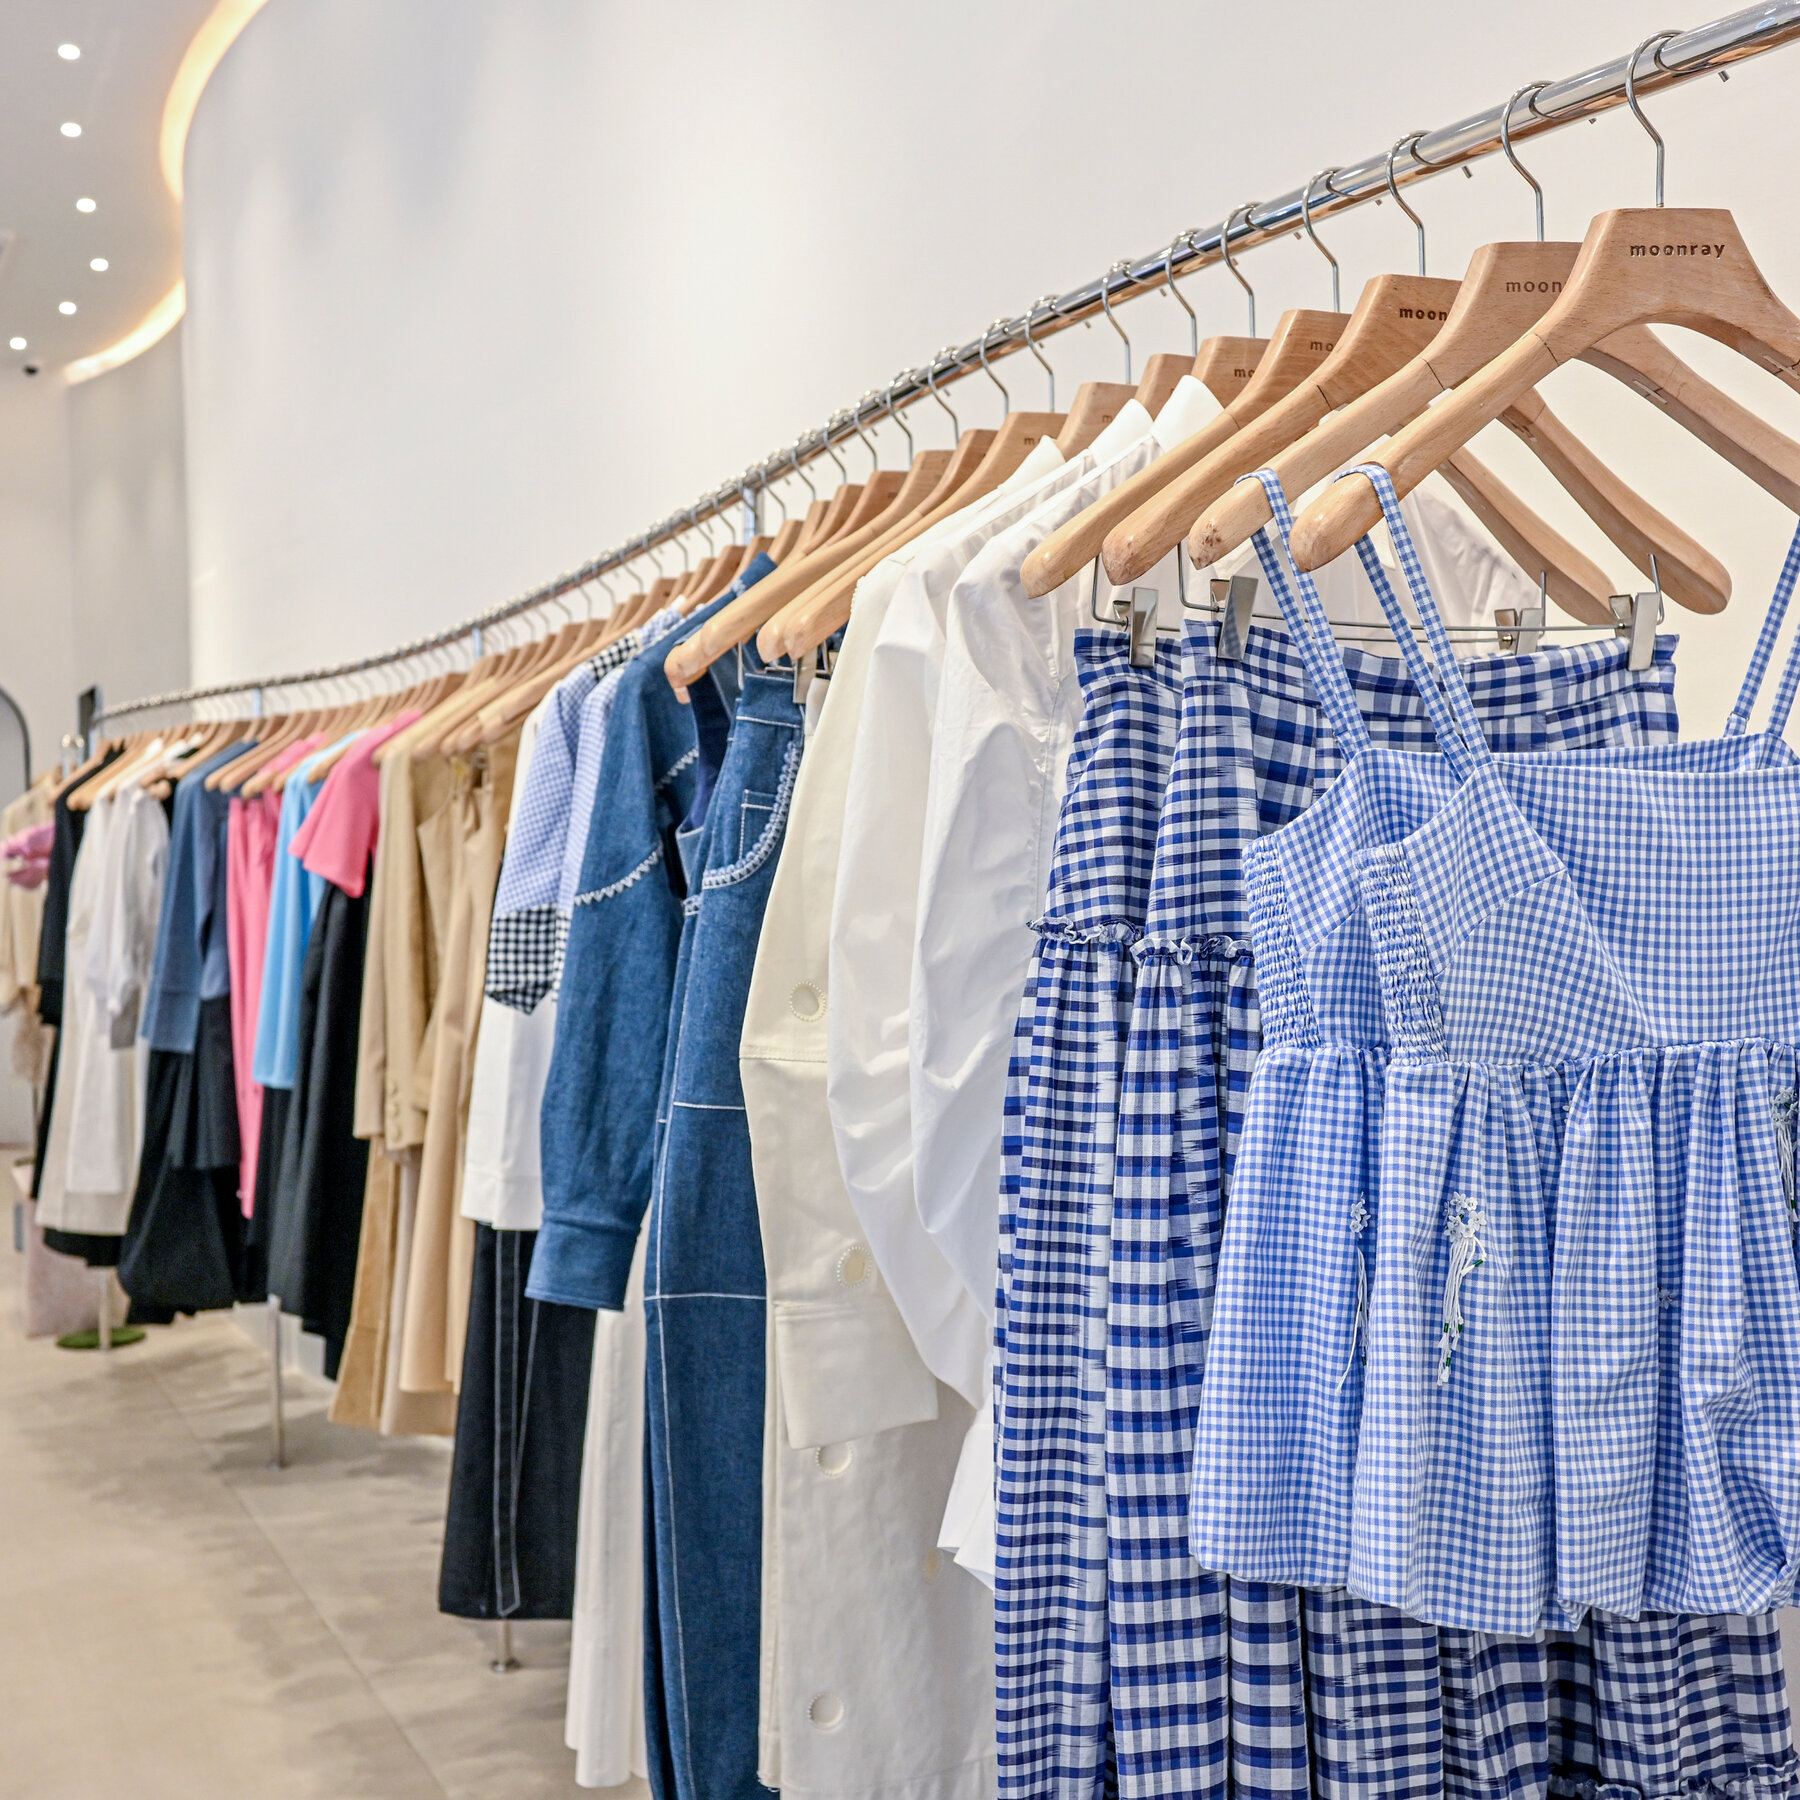 A brightly lit store with white walls displays a long rack of clothing, including gingham skirts and tops, white shirts and denim apparel.